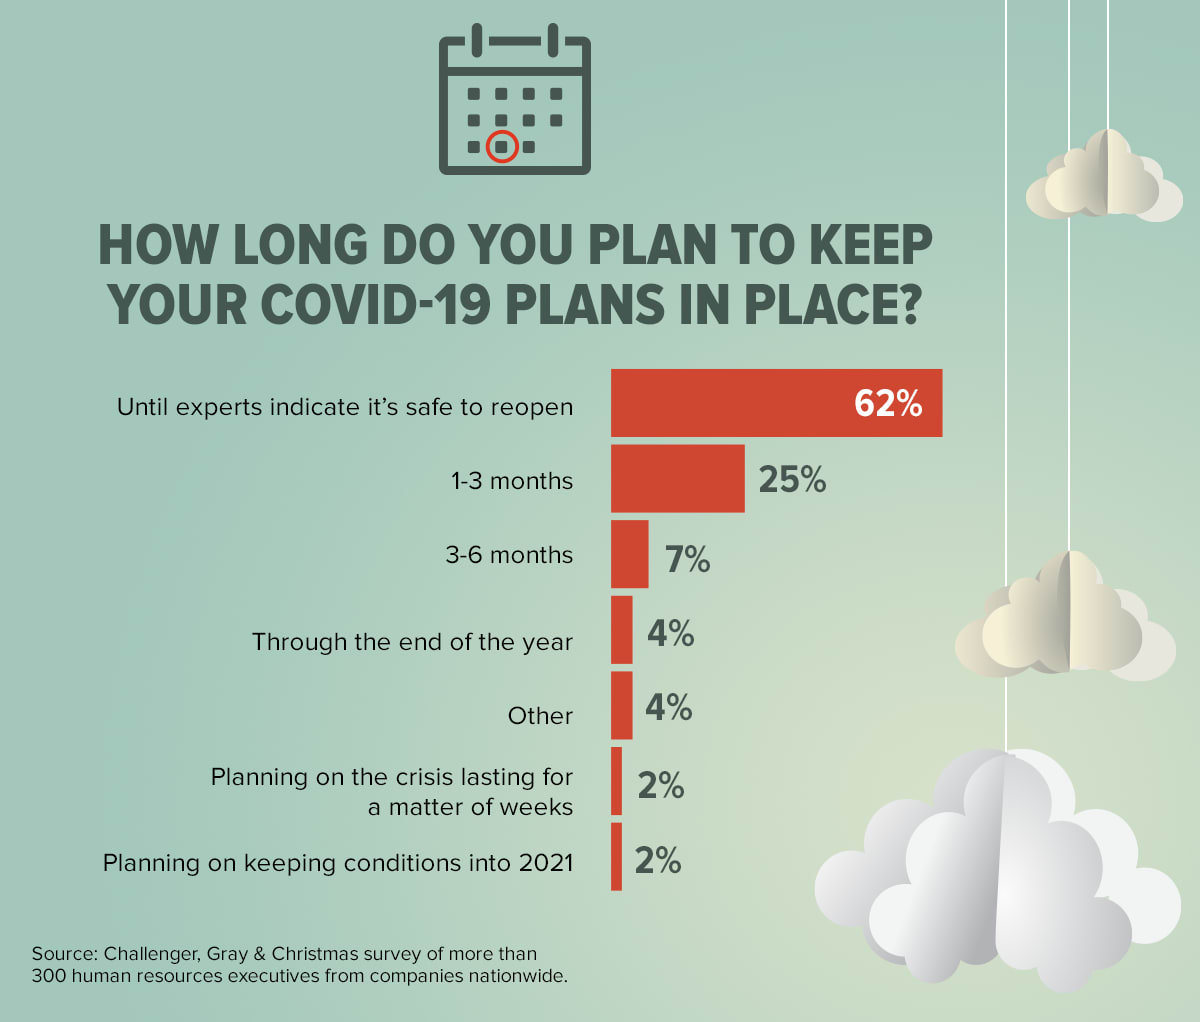 How long do you plan to keep your COVID-19 plans in place?